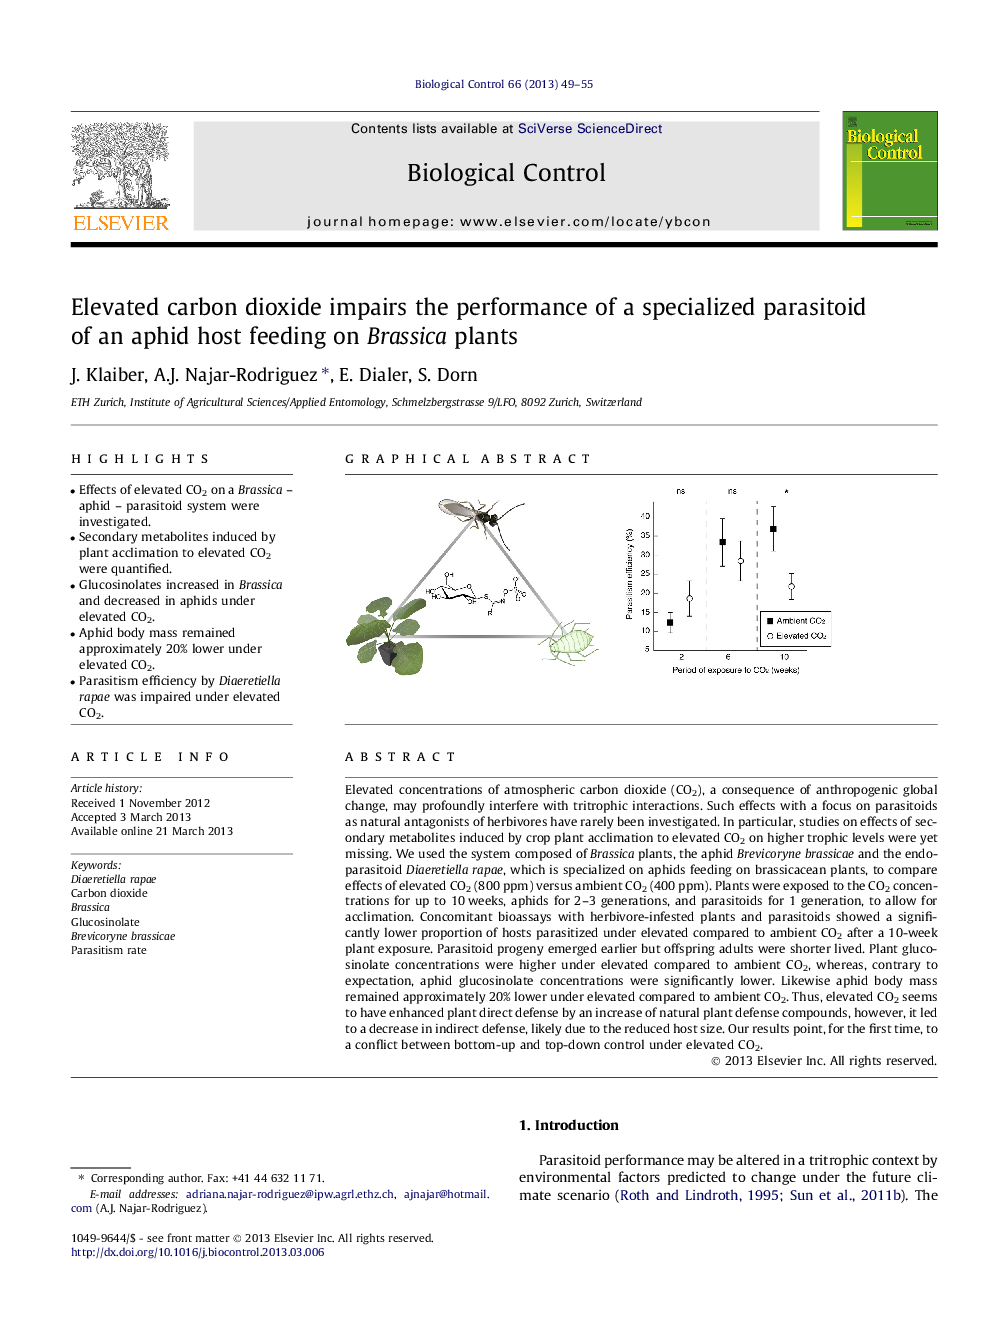 Elevated carbon dioxide impairs the performance of a specialized parasitoid of an aphid host feeding on Brassica plants